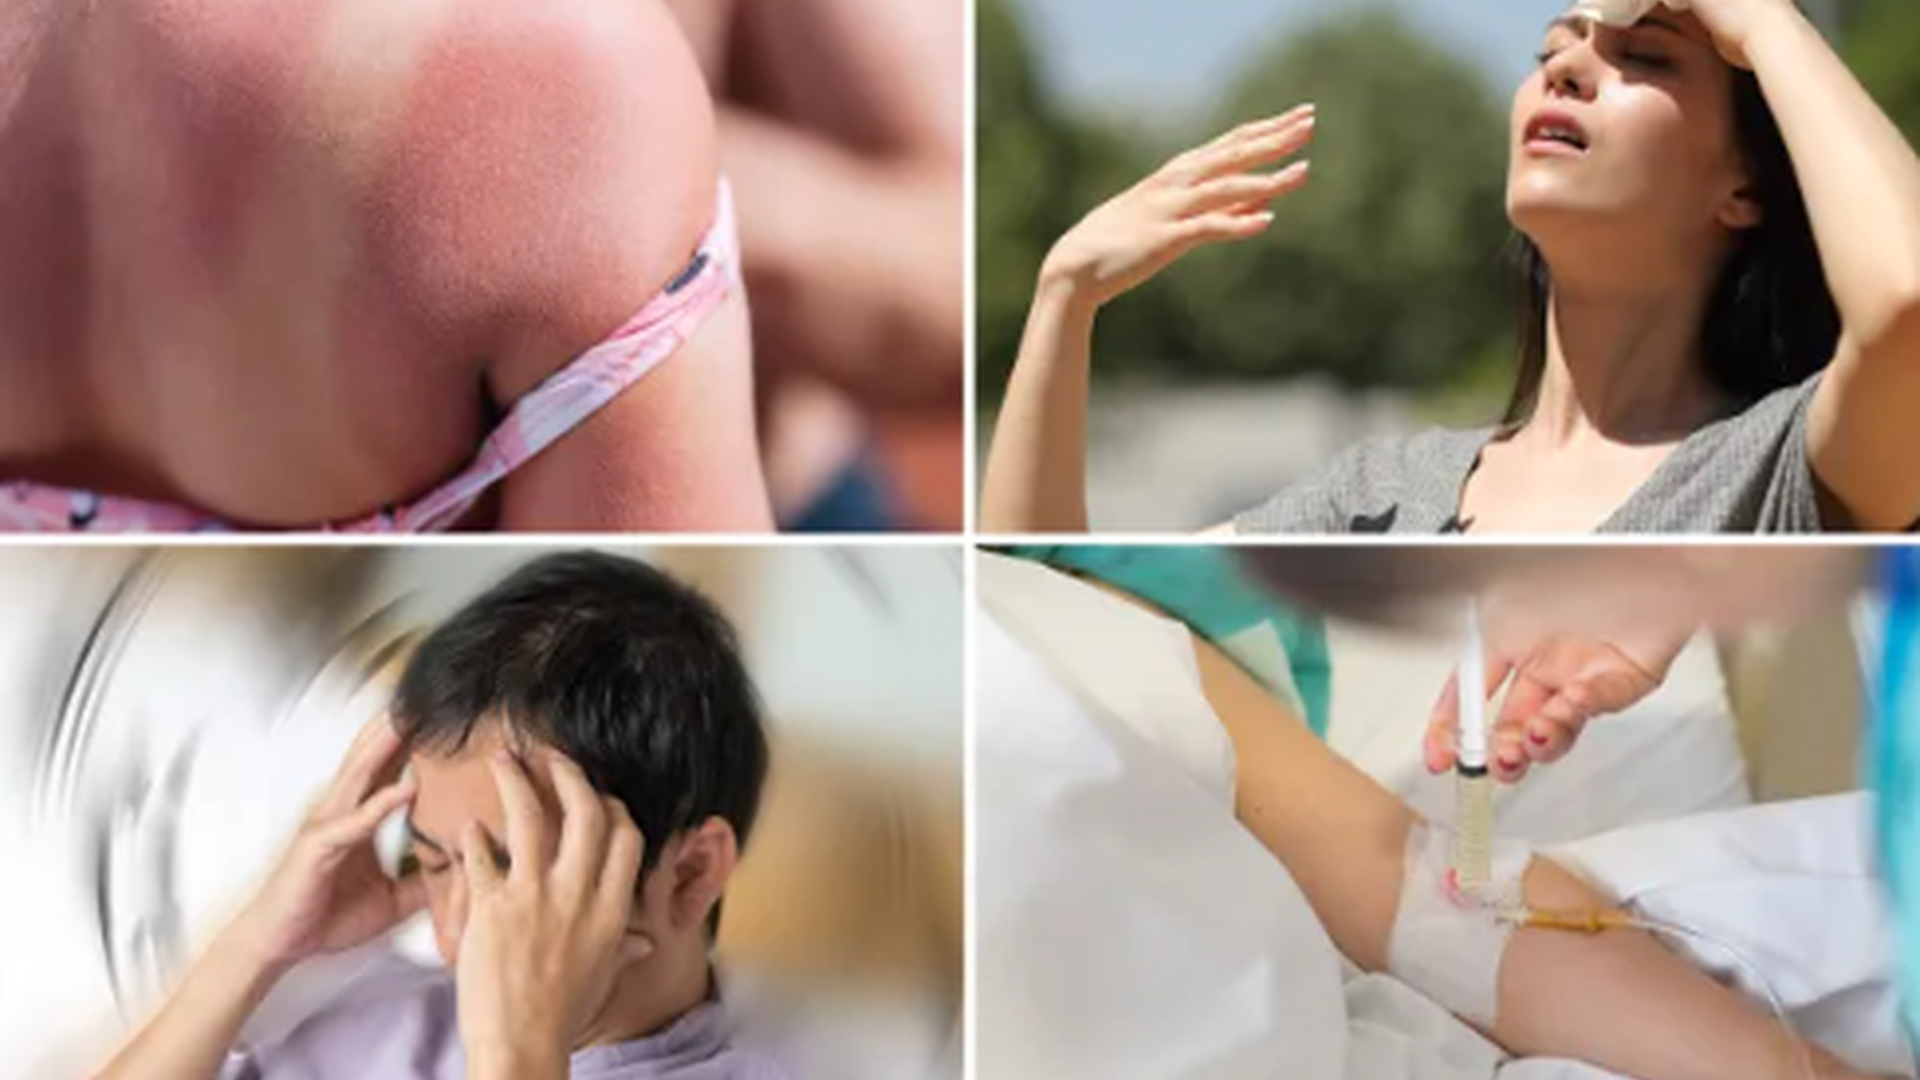 Vulnerable at risk of ‘dangerous’ medical issues triggered by the heat, experts warn [Video]